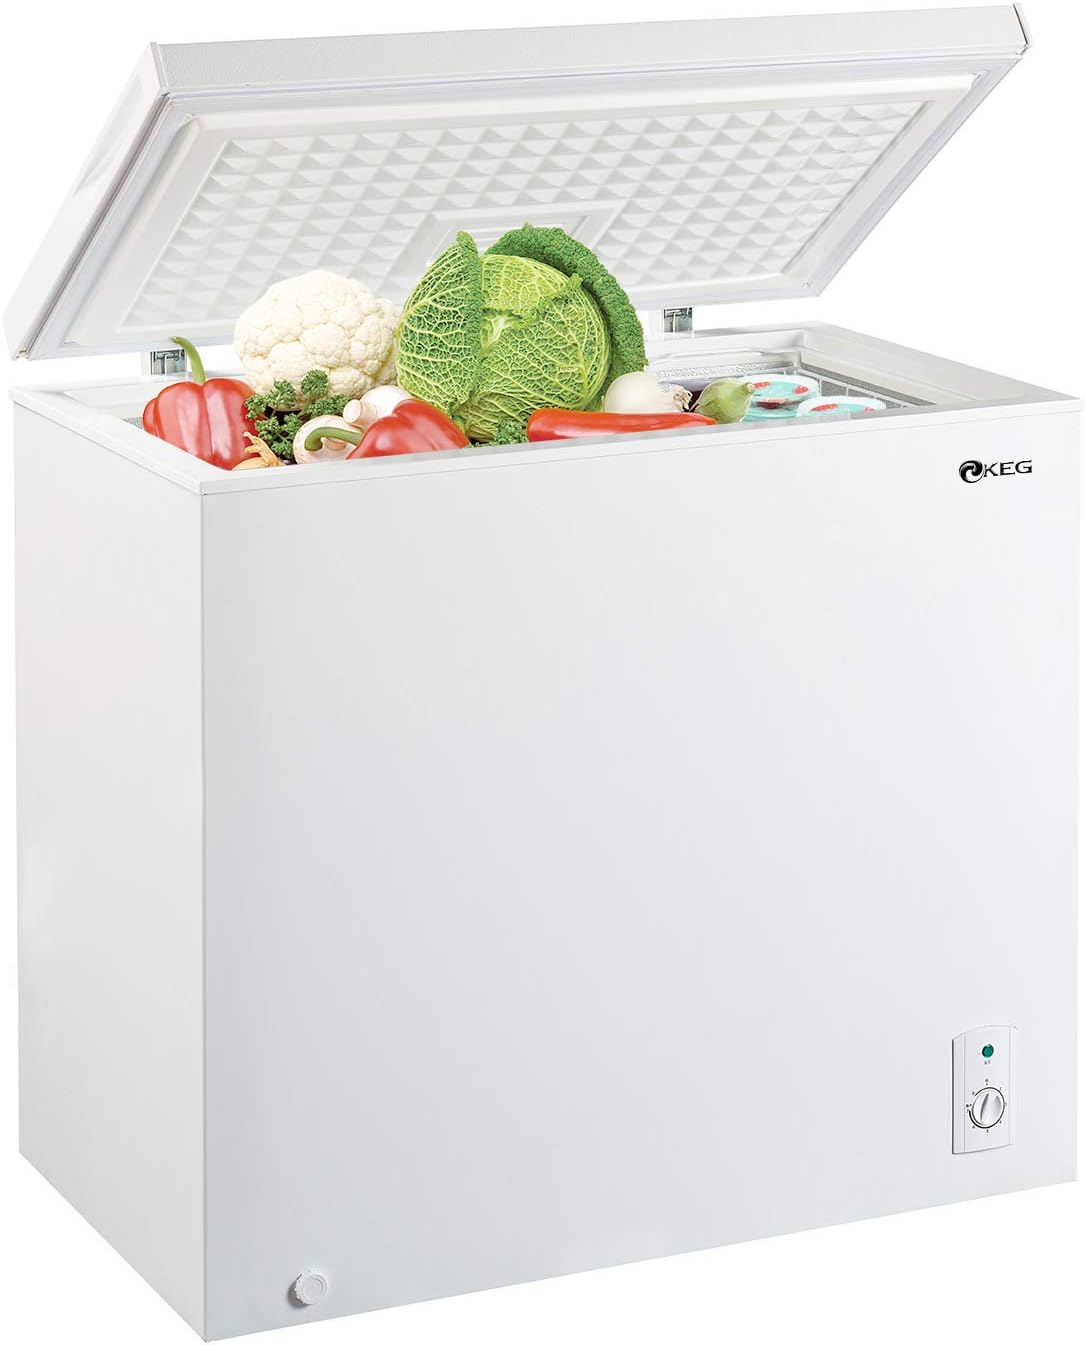 KEG 7.0 Cubic Feet Top Chest Freezer with Adjustable [...]